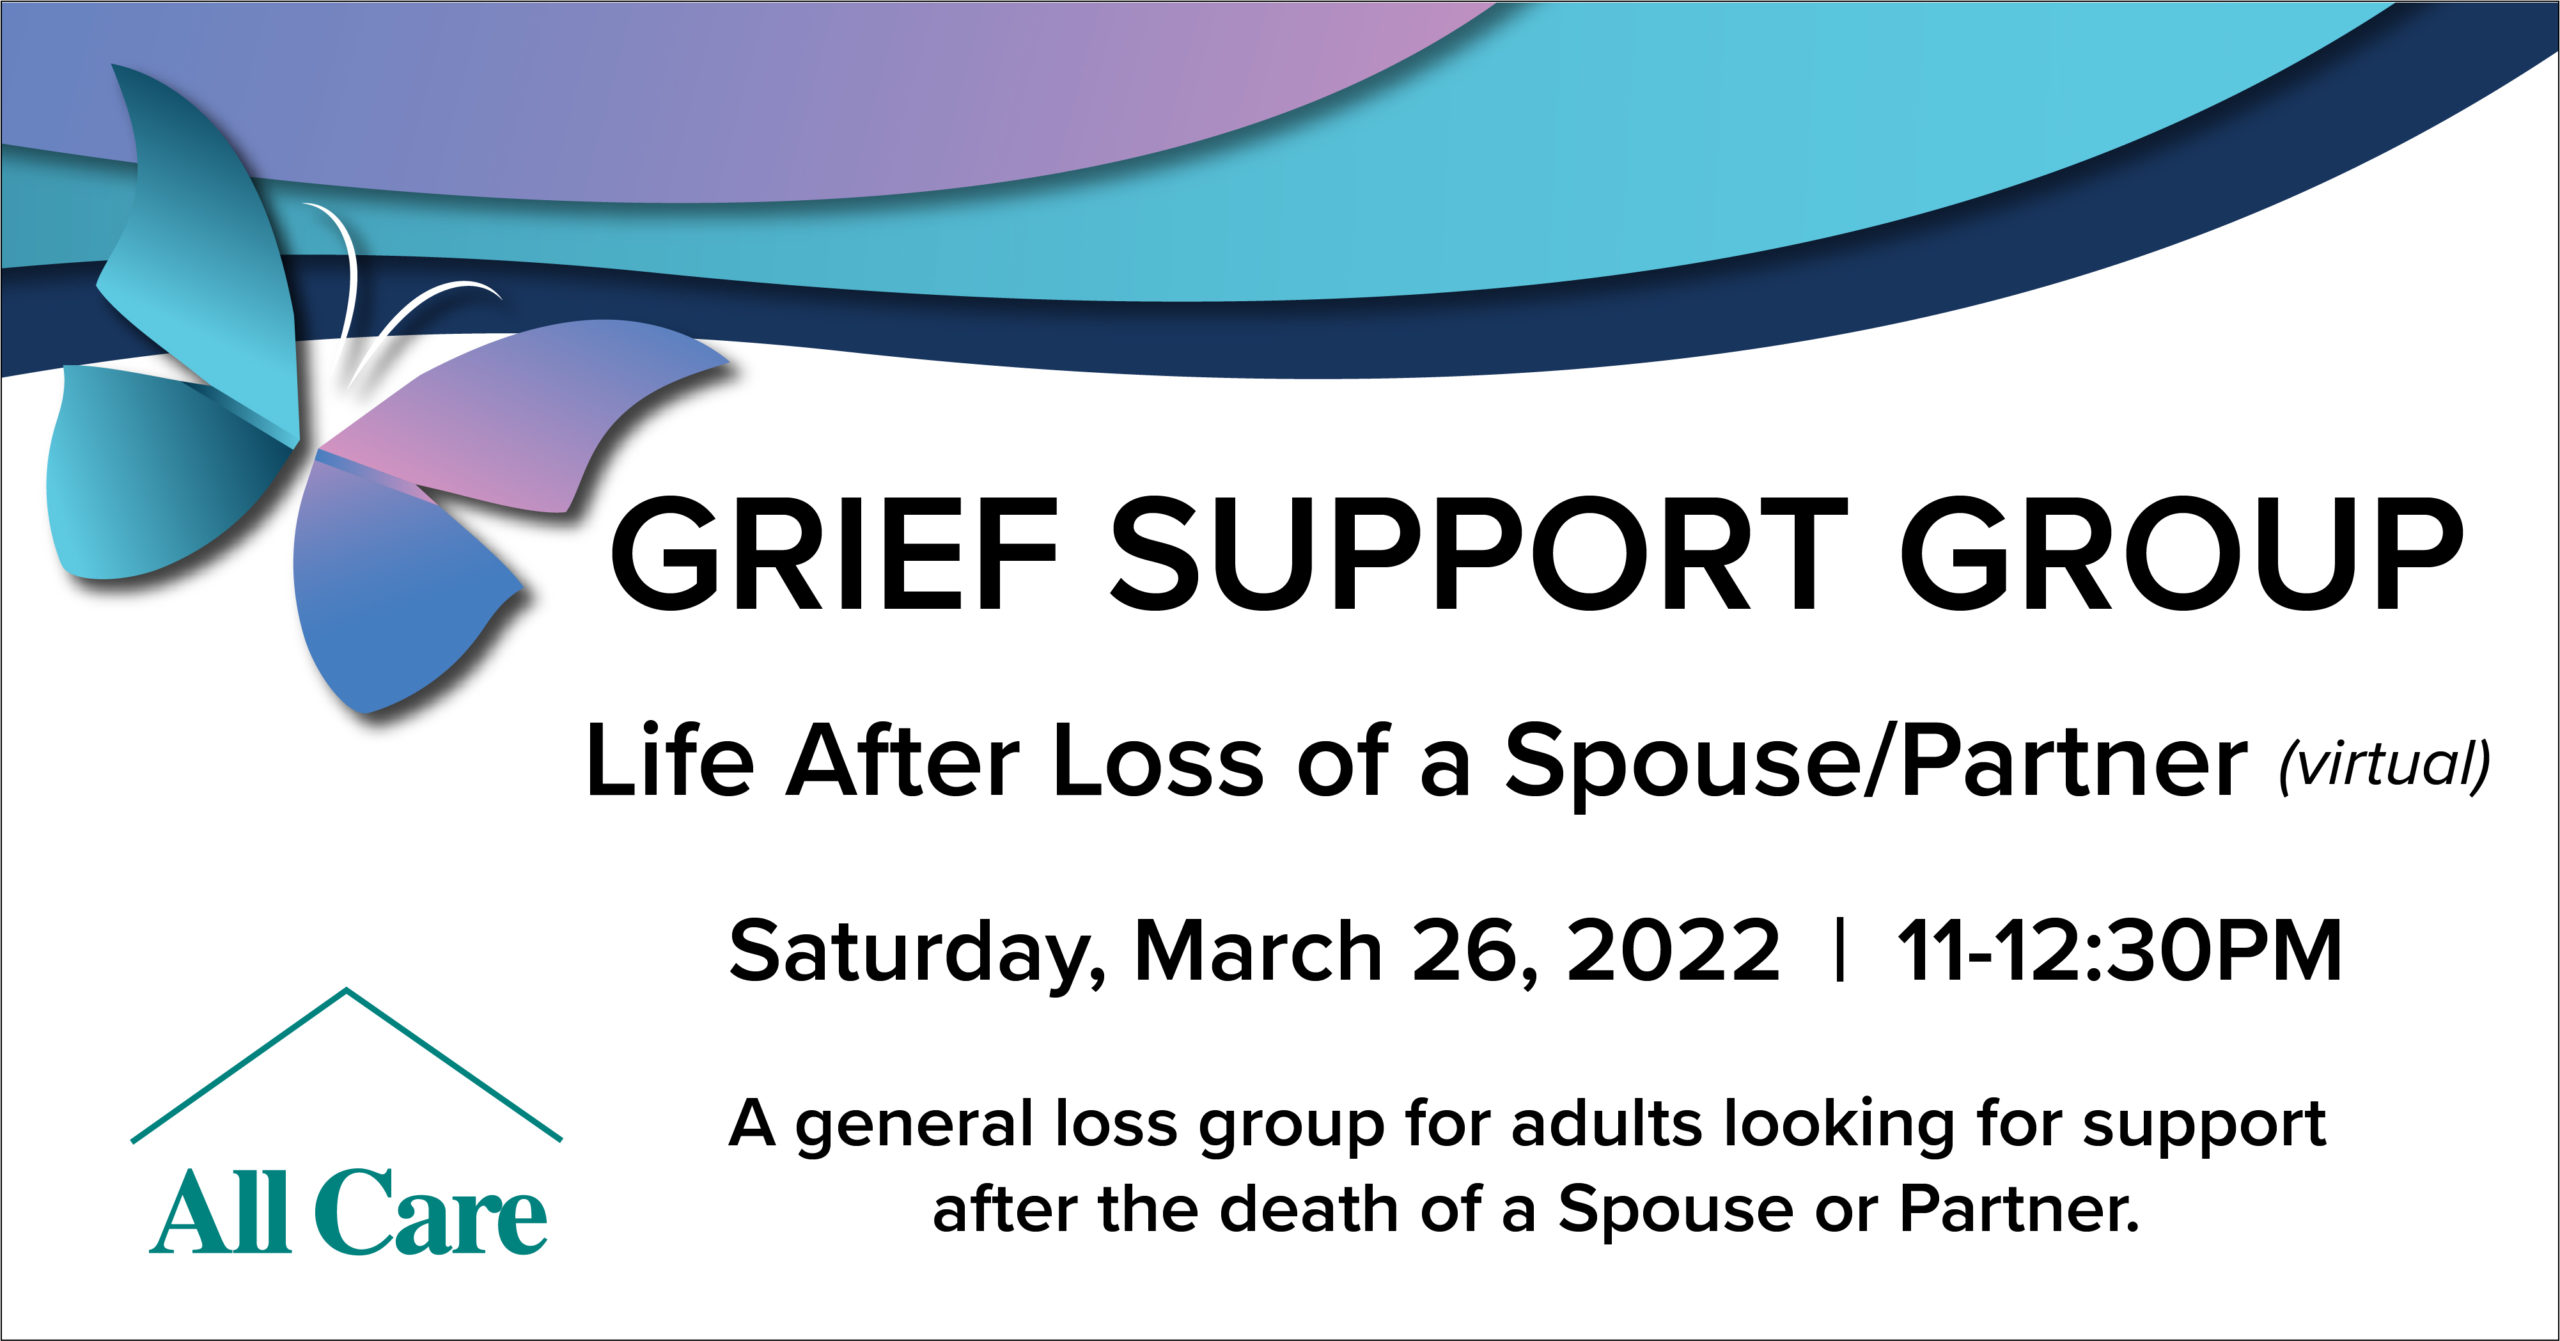 Life After Loss of a Spouse/Partner, Grief Support Group